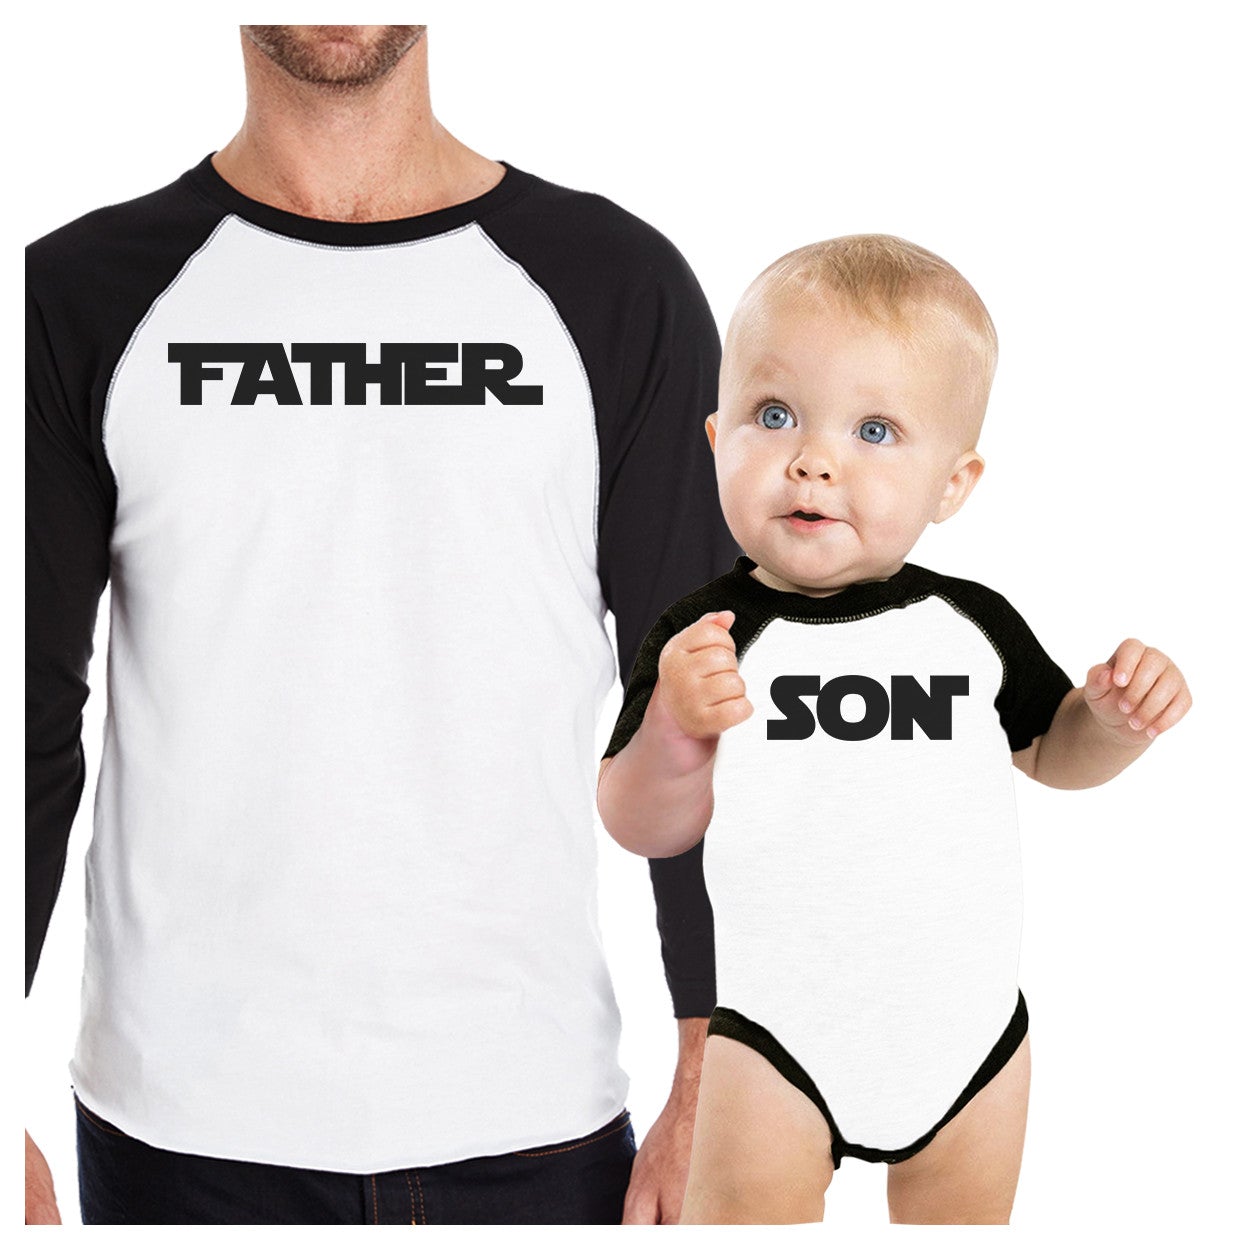 Father Son Star Battle Theme Dad and Baby Matching Black And White Baseball Shirts